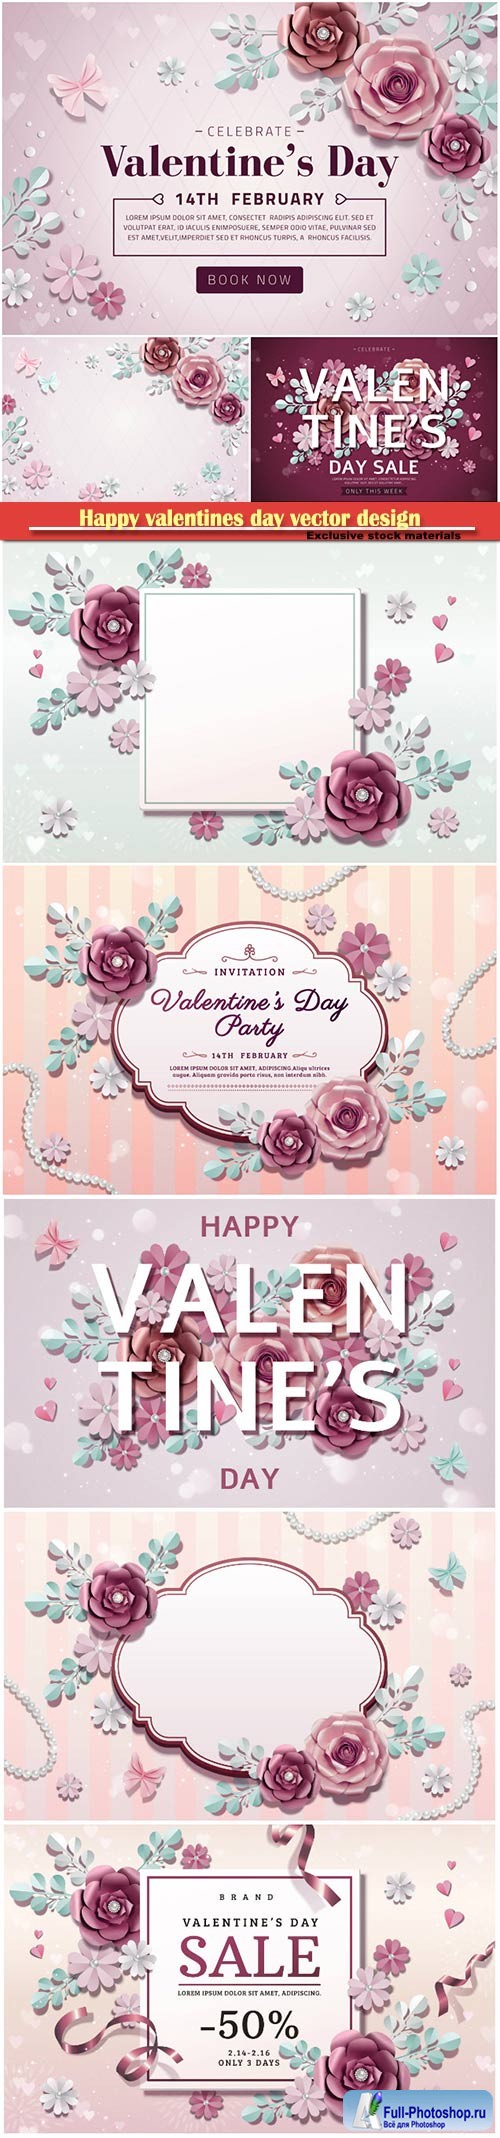 Happy valentines day vector design with heart, balloons, roses in 3d illustration # 6